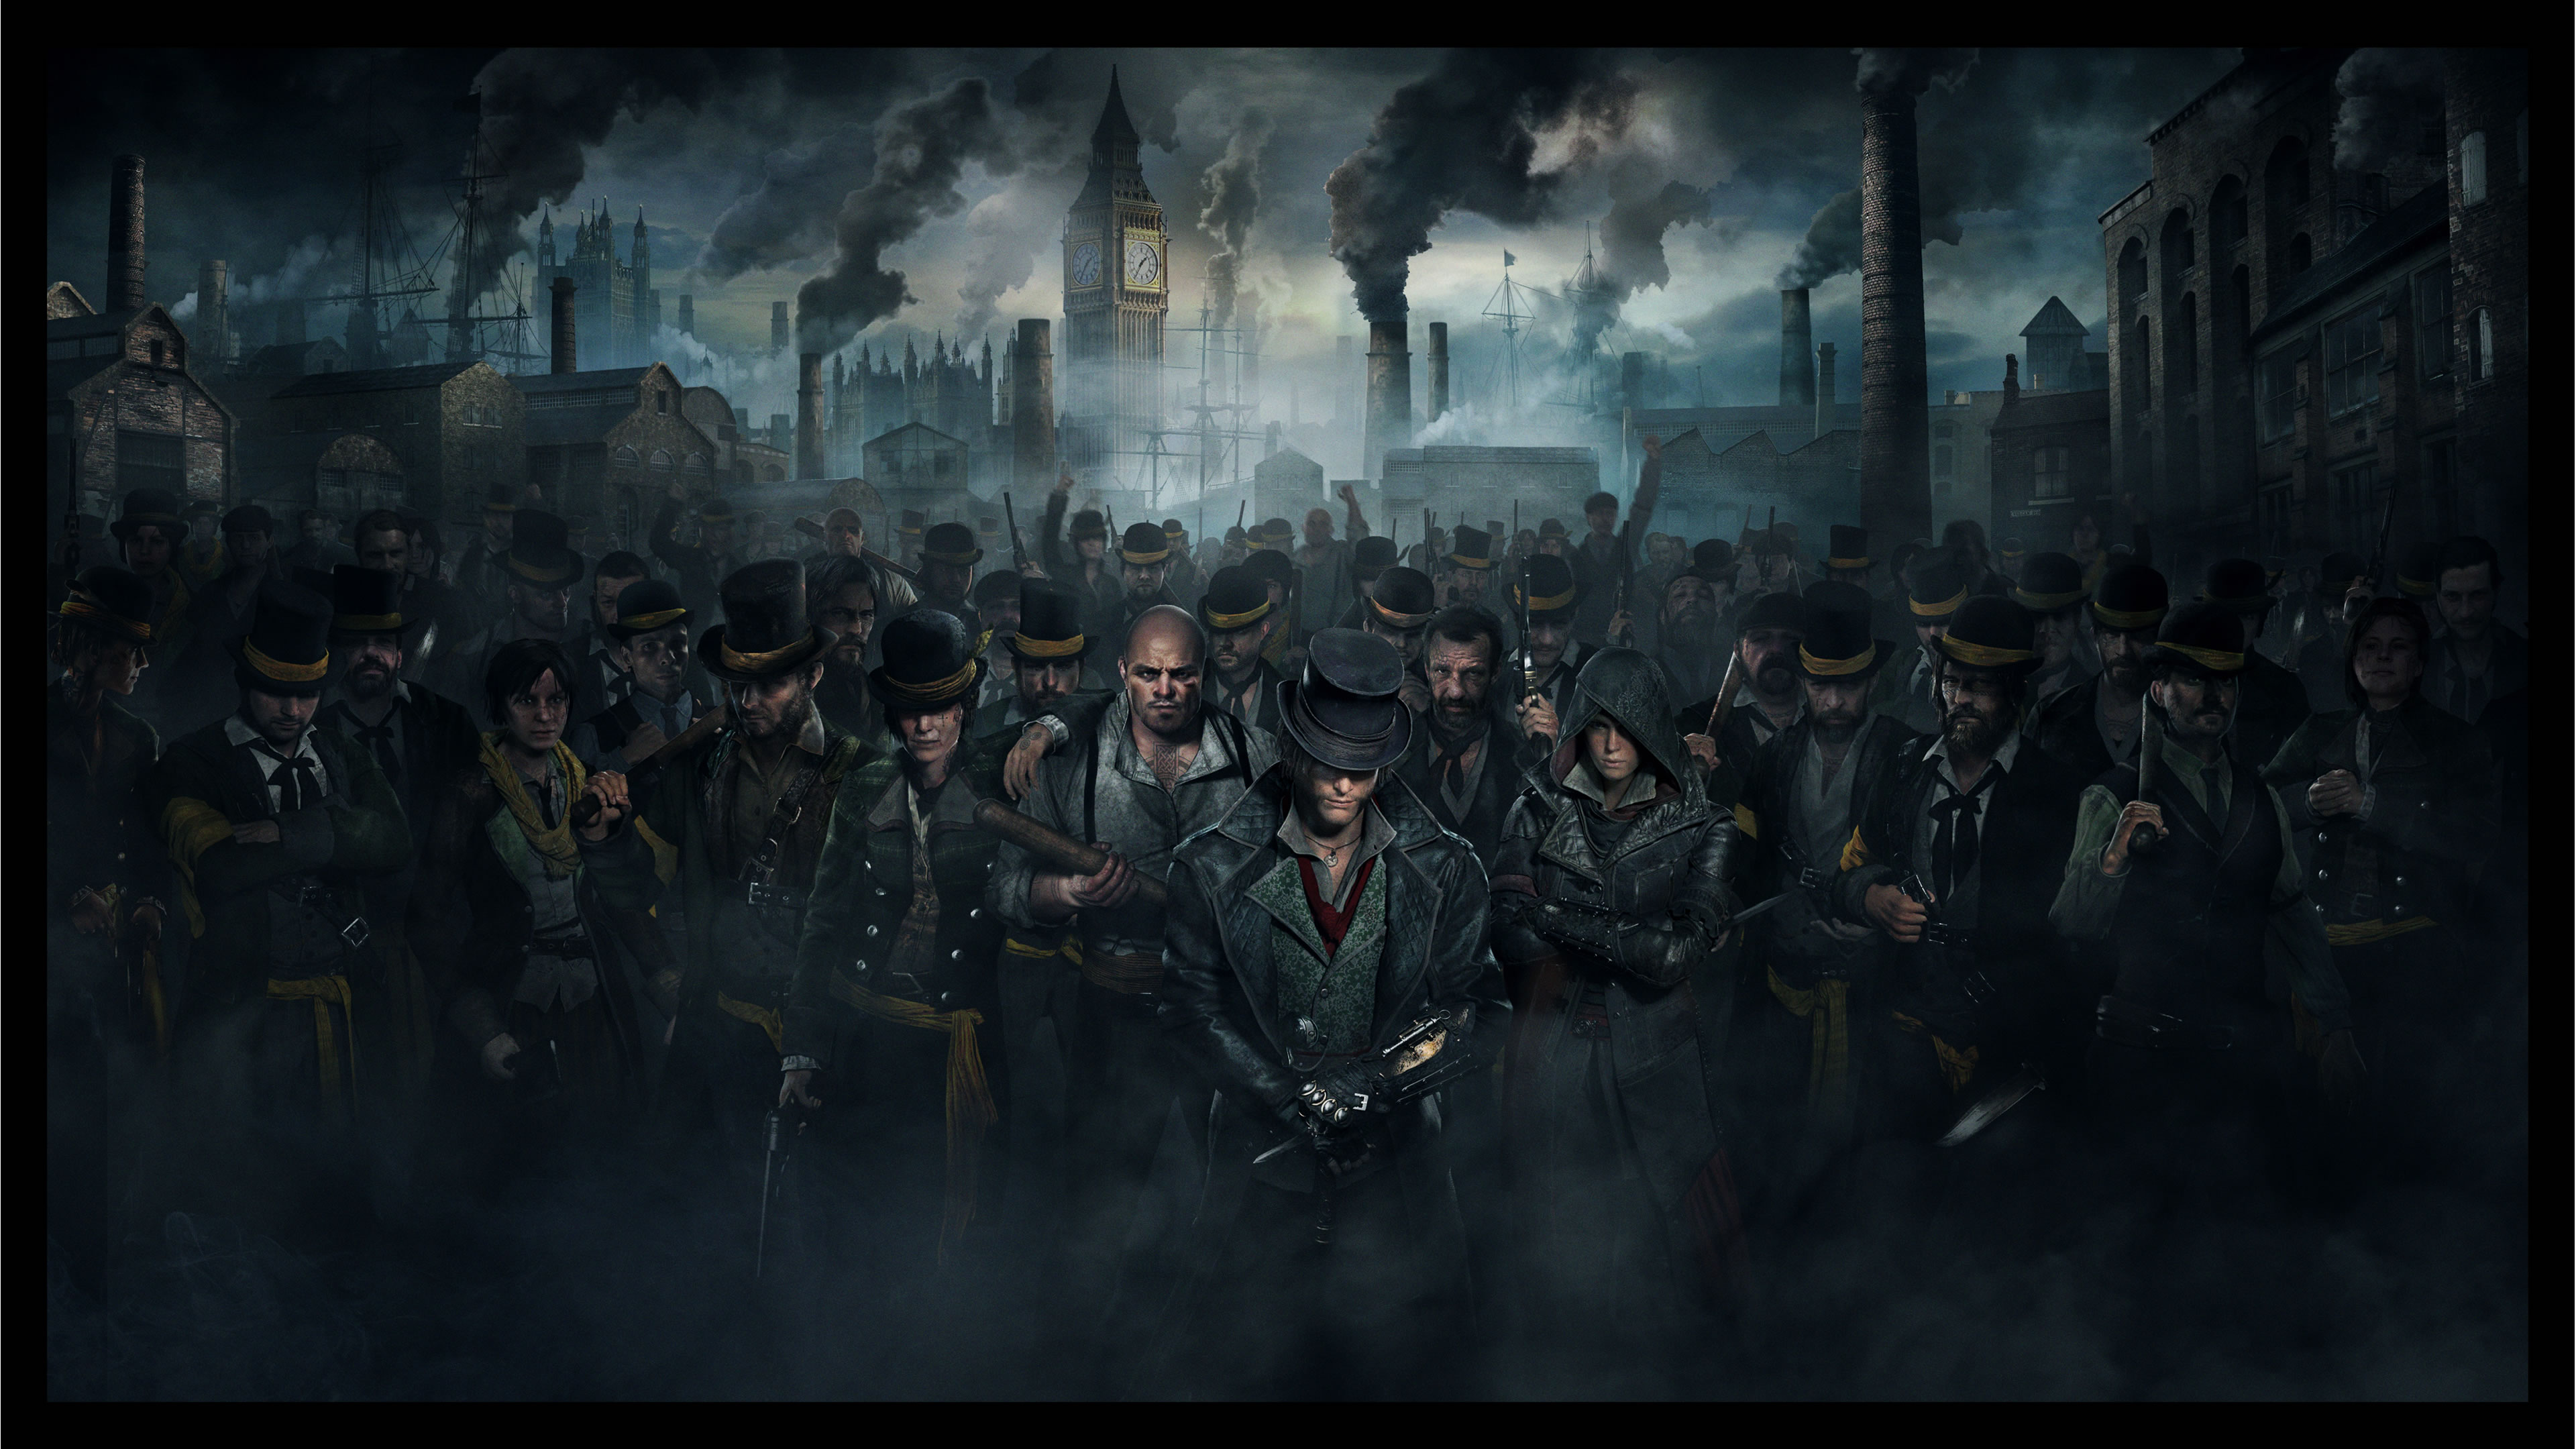 assassin creed syndicate wallpaper,action adventure game,darkness,strategy video game,digital compositing,crowd